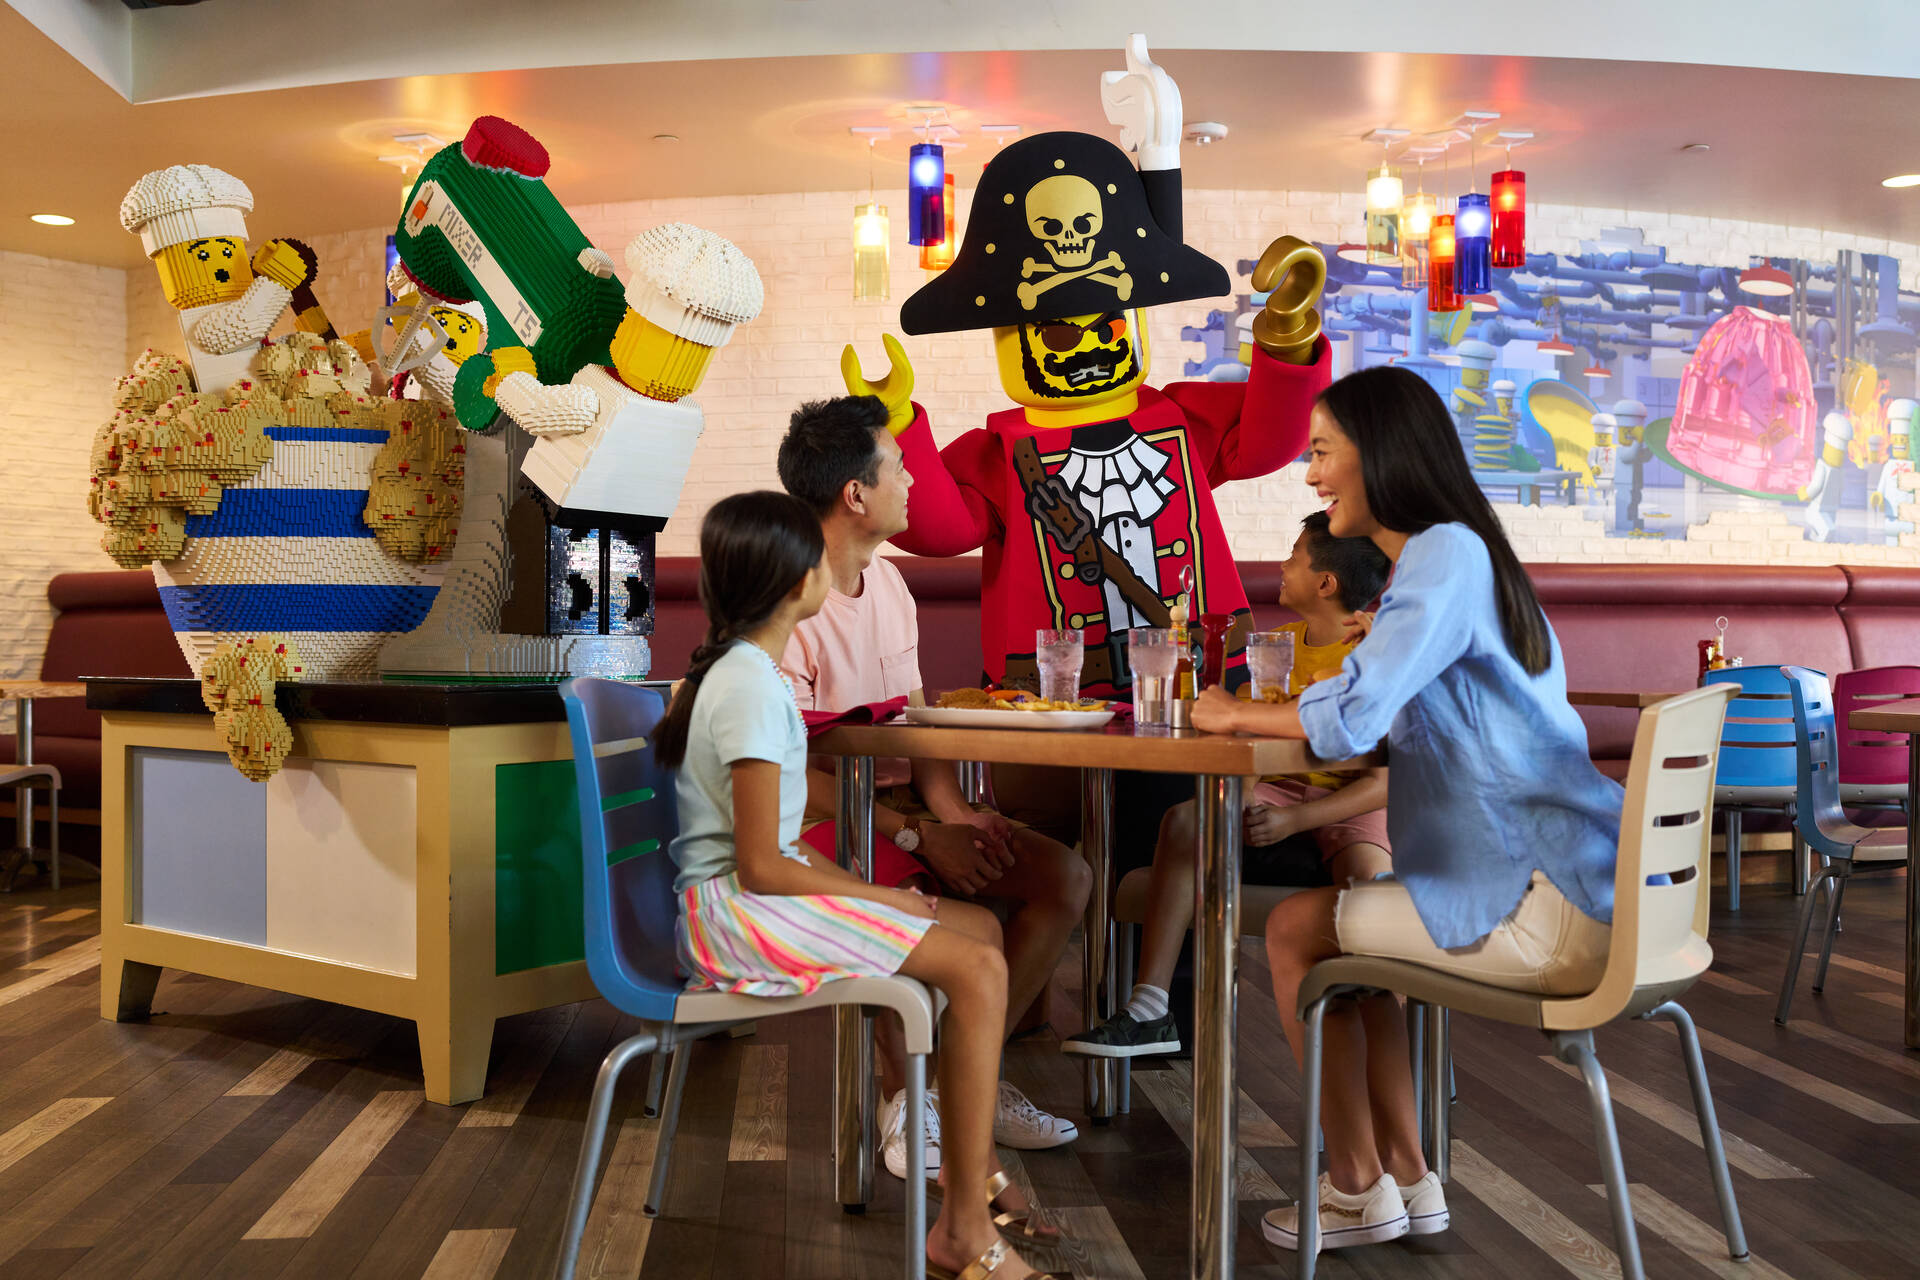 Family Eats at Brick's Family Restaurant with a LEGO Pirate Character 